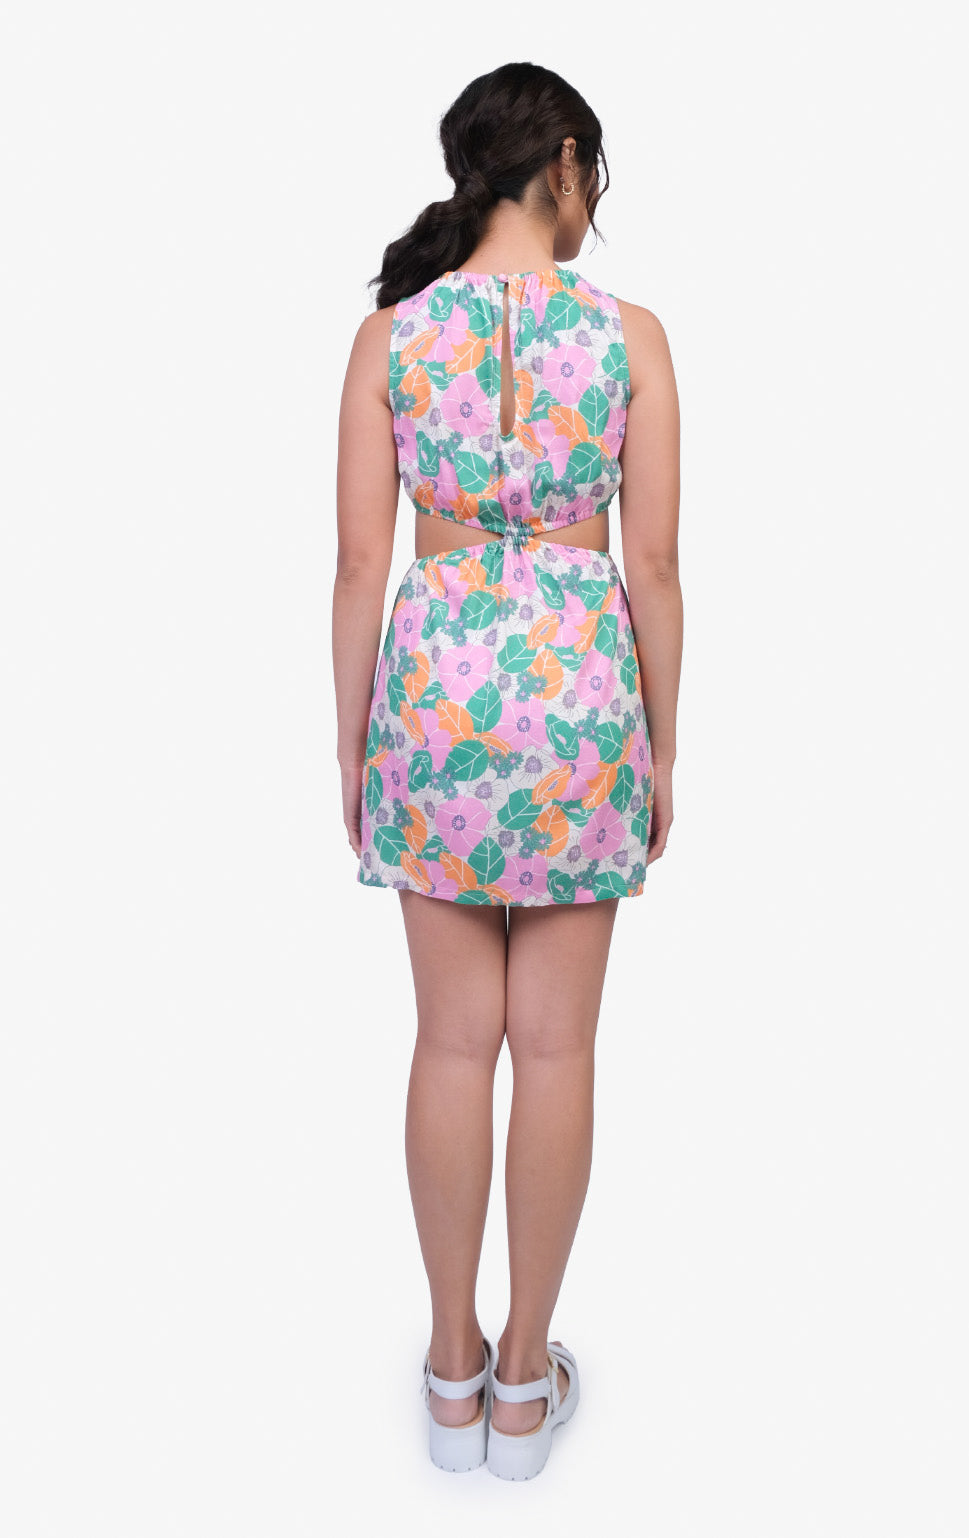 GROOVY FLORAL PRINT HALTER CUT OUT DRESS